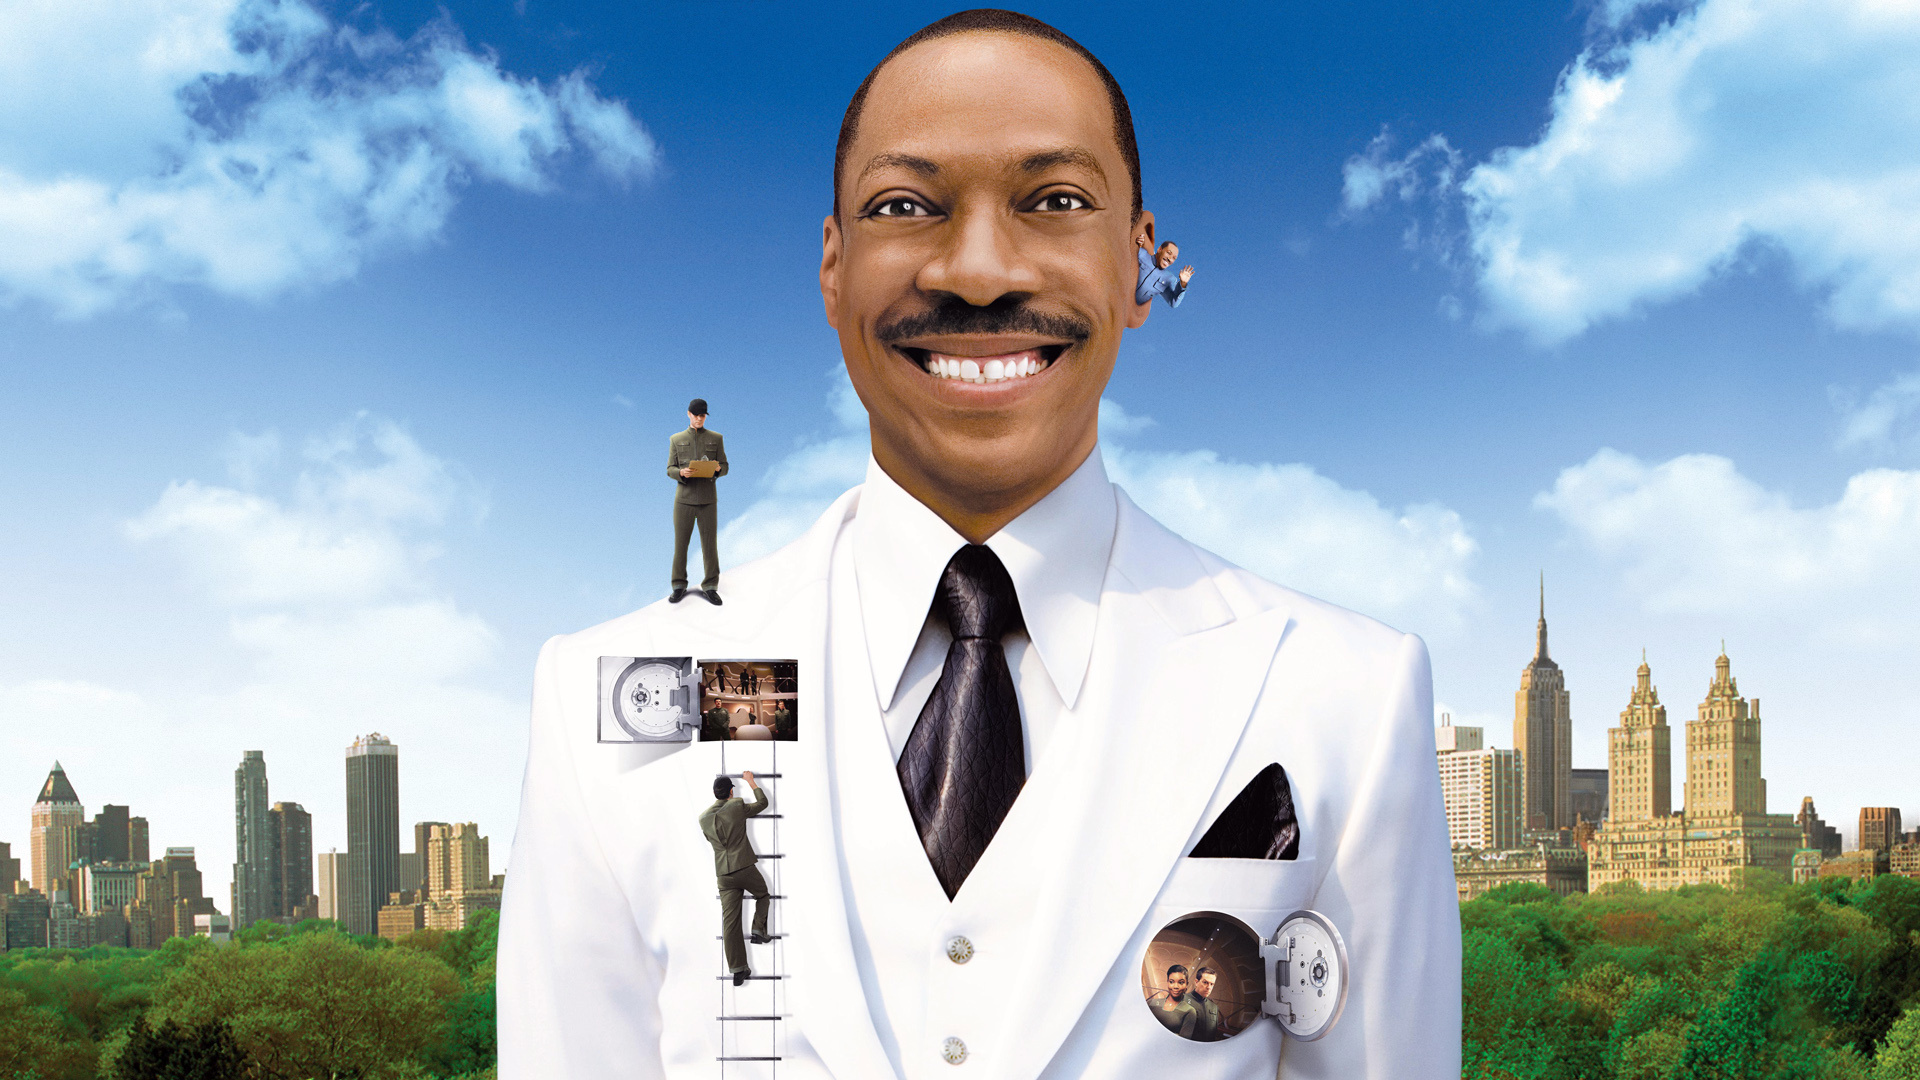 Eddie Murphy: Meet Dave, A 2008 American science fiction comedy film, Dave Ming Chang. 1920x1080 Full HD Background.